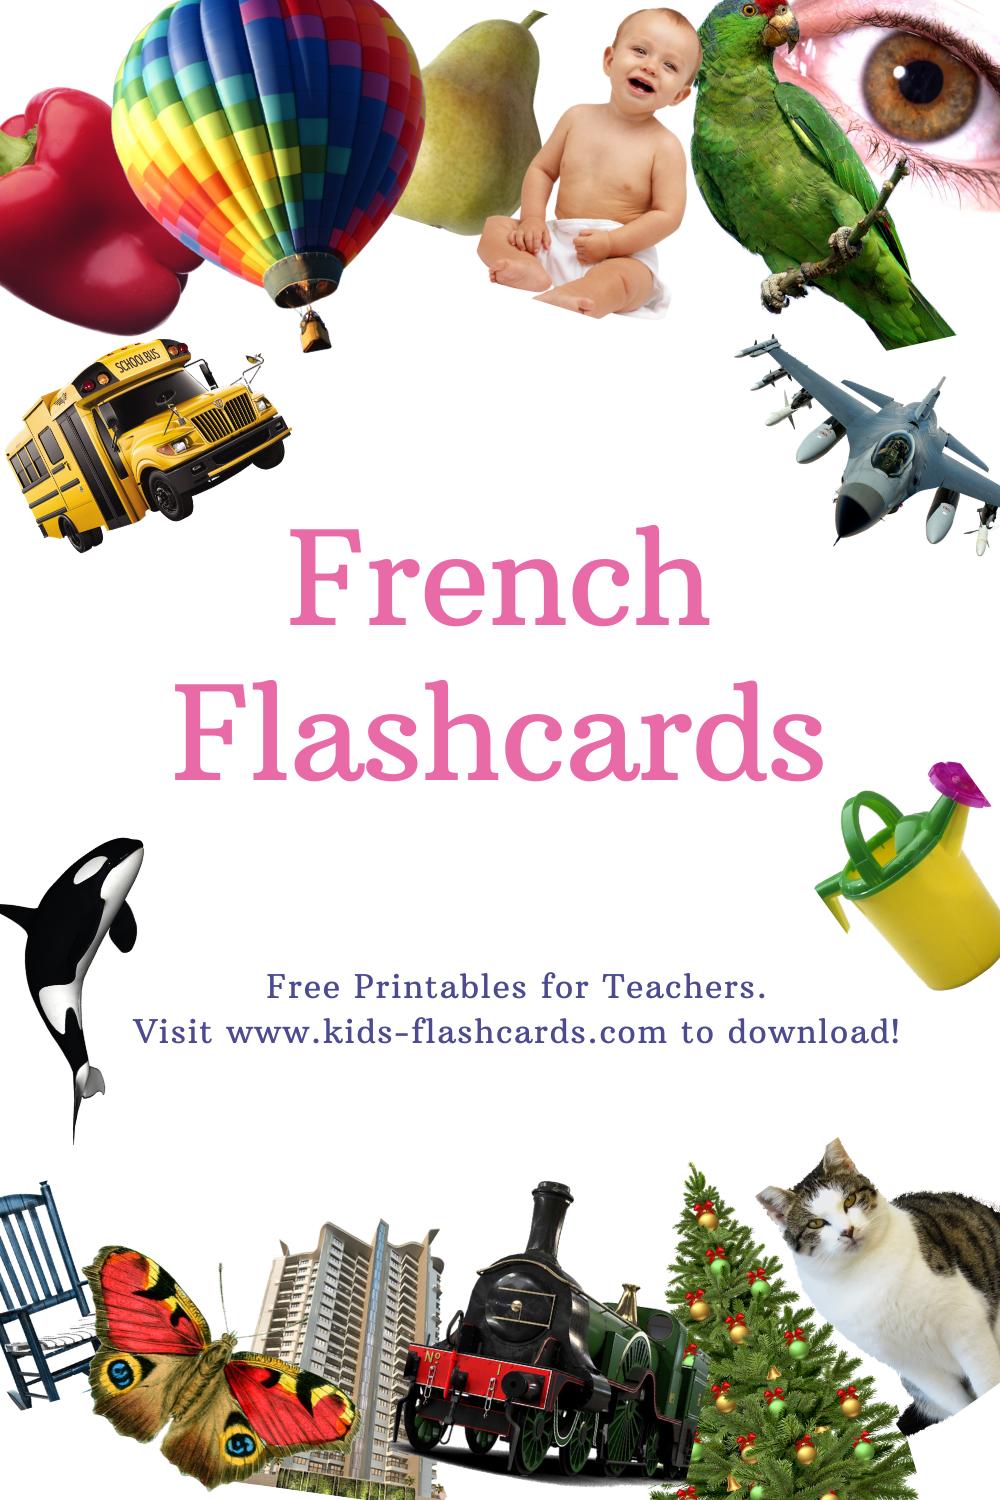 Worksheets to learn French language